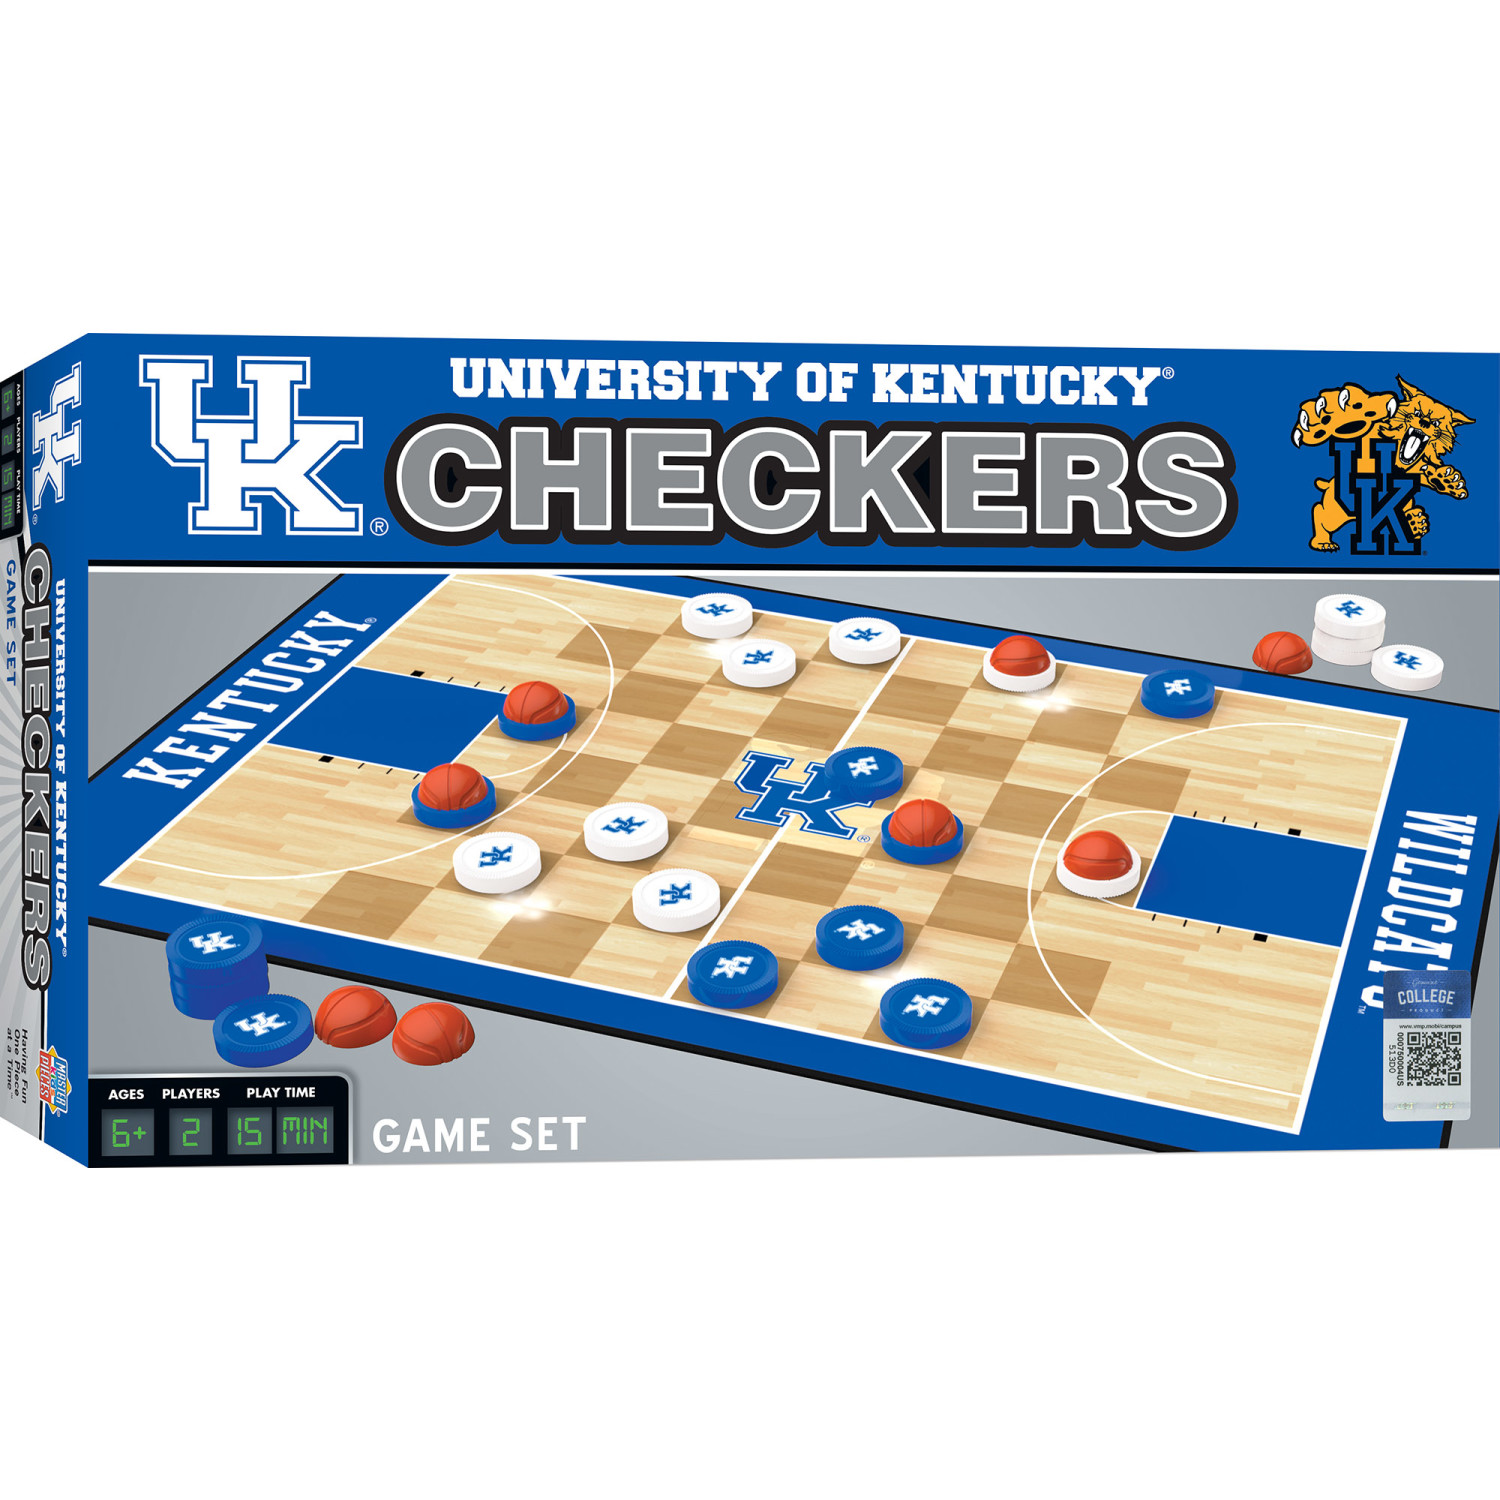 MasterPieces Officially licensed NCAA Kentucky Wildcats Checkers Board Game for Families and Kids ages 6 and Up - image 2 of 5